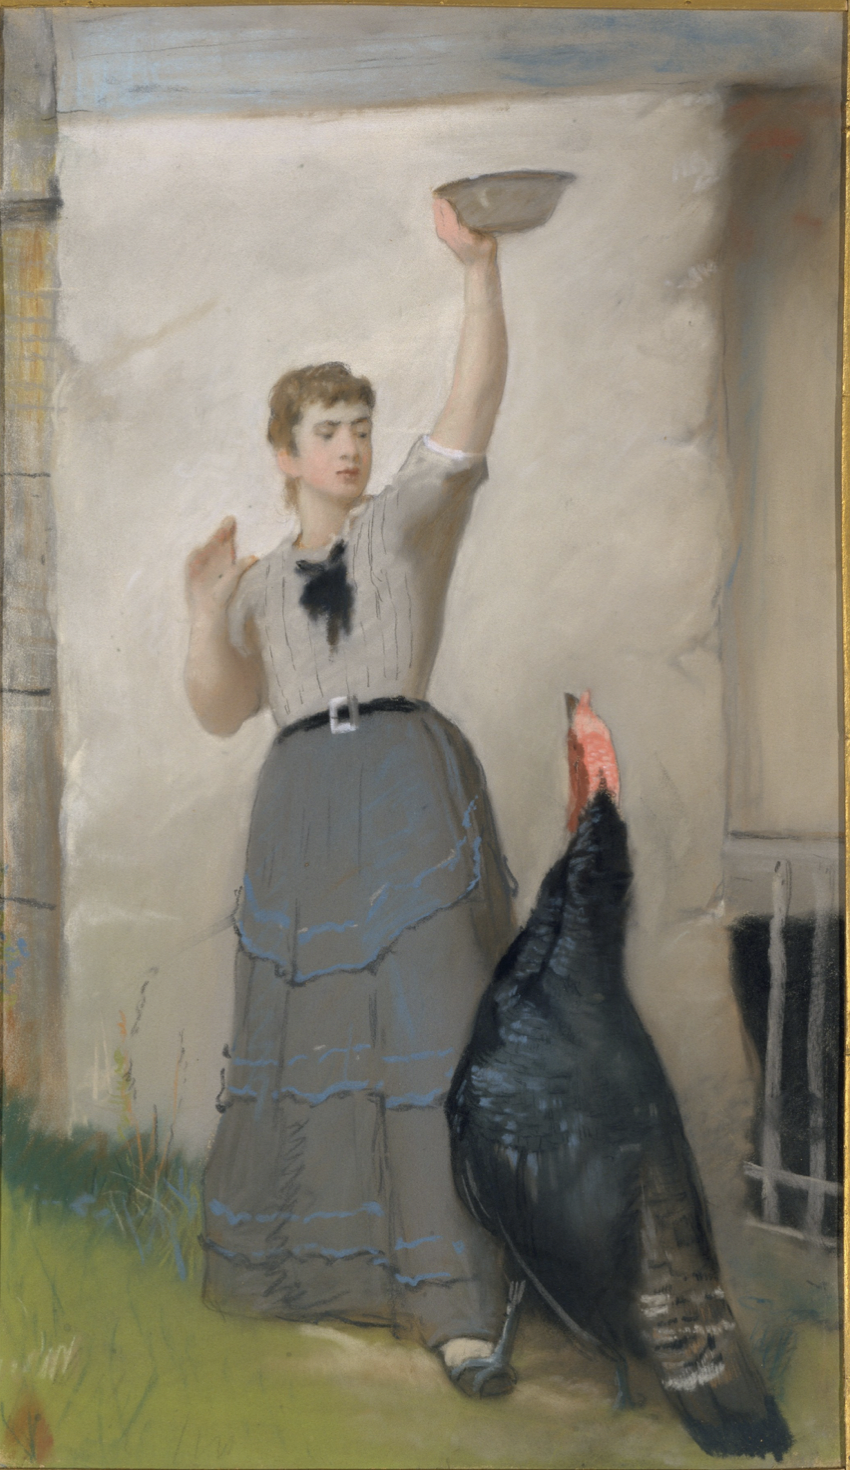 Eastman Johnson, "Feeding the Turkey," ca. 1872-80, pastel on wove paper mounted to canvas on a wooden stretcher, 61 x 35.6 cm (24 x 14 in), Metropolitan Museum of Art, New York, USA -